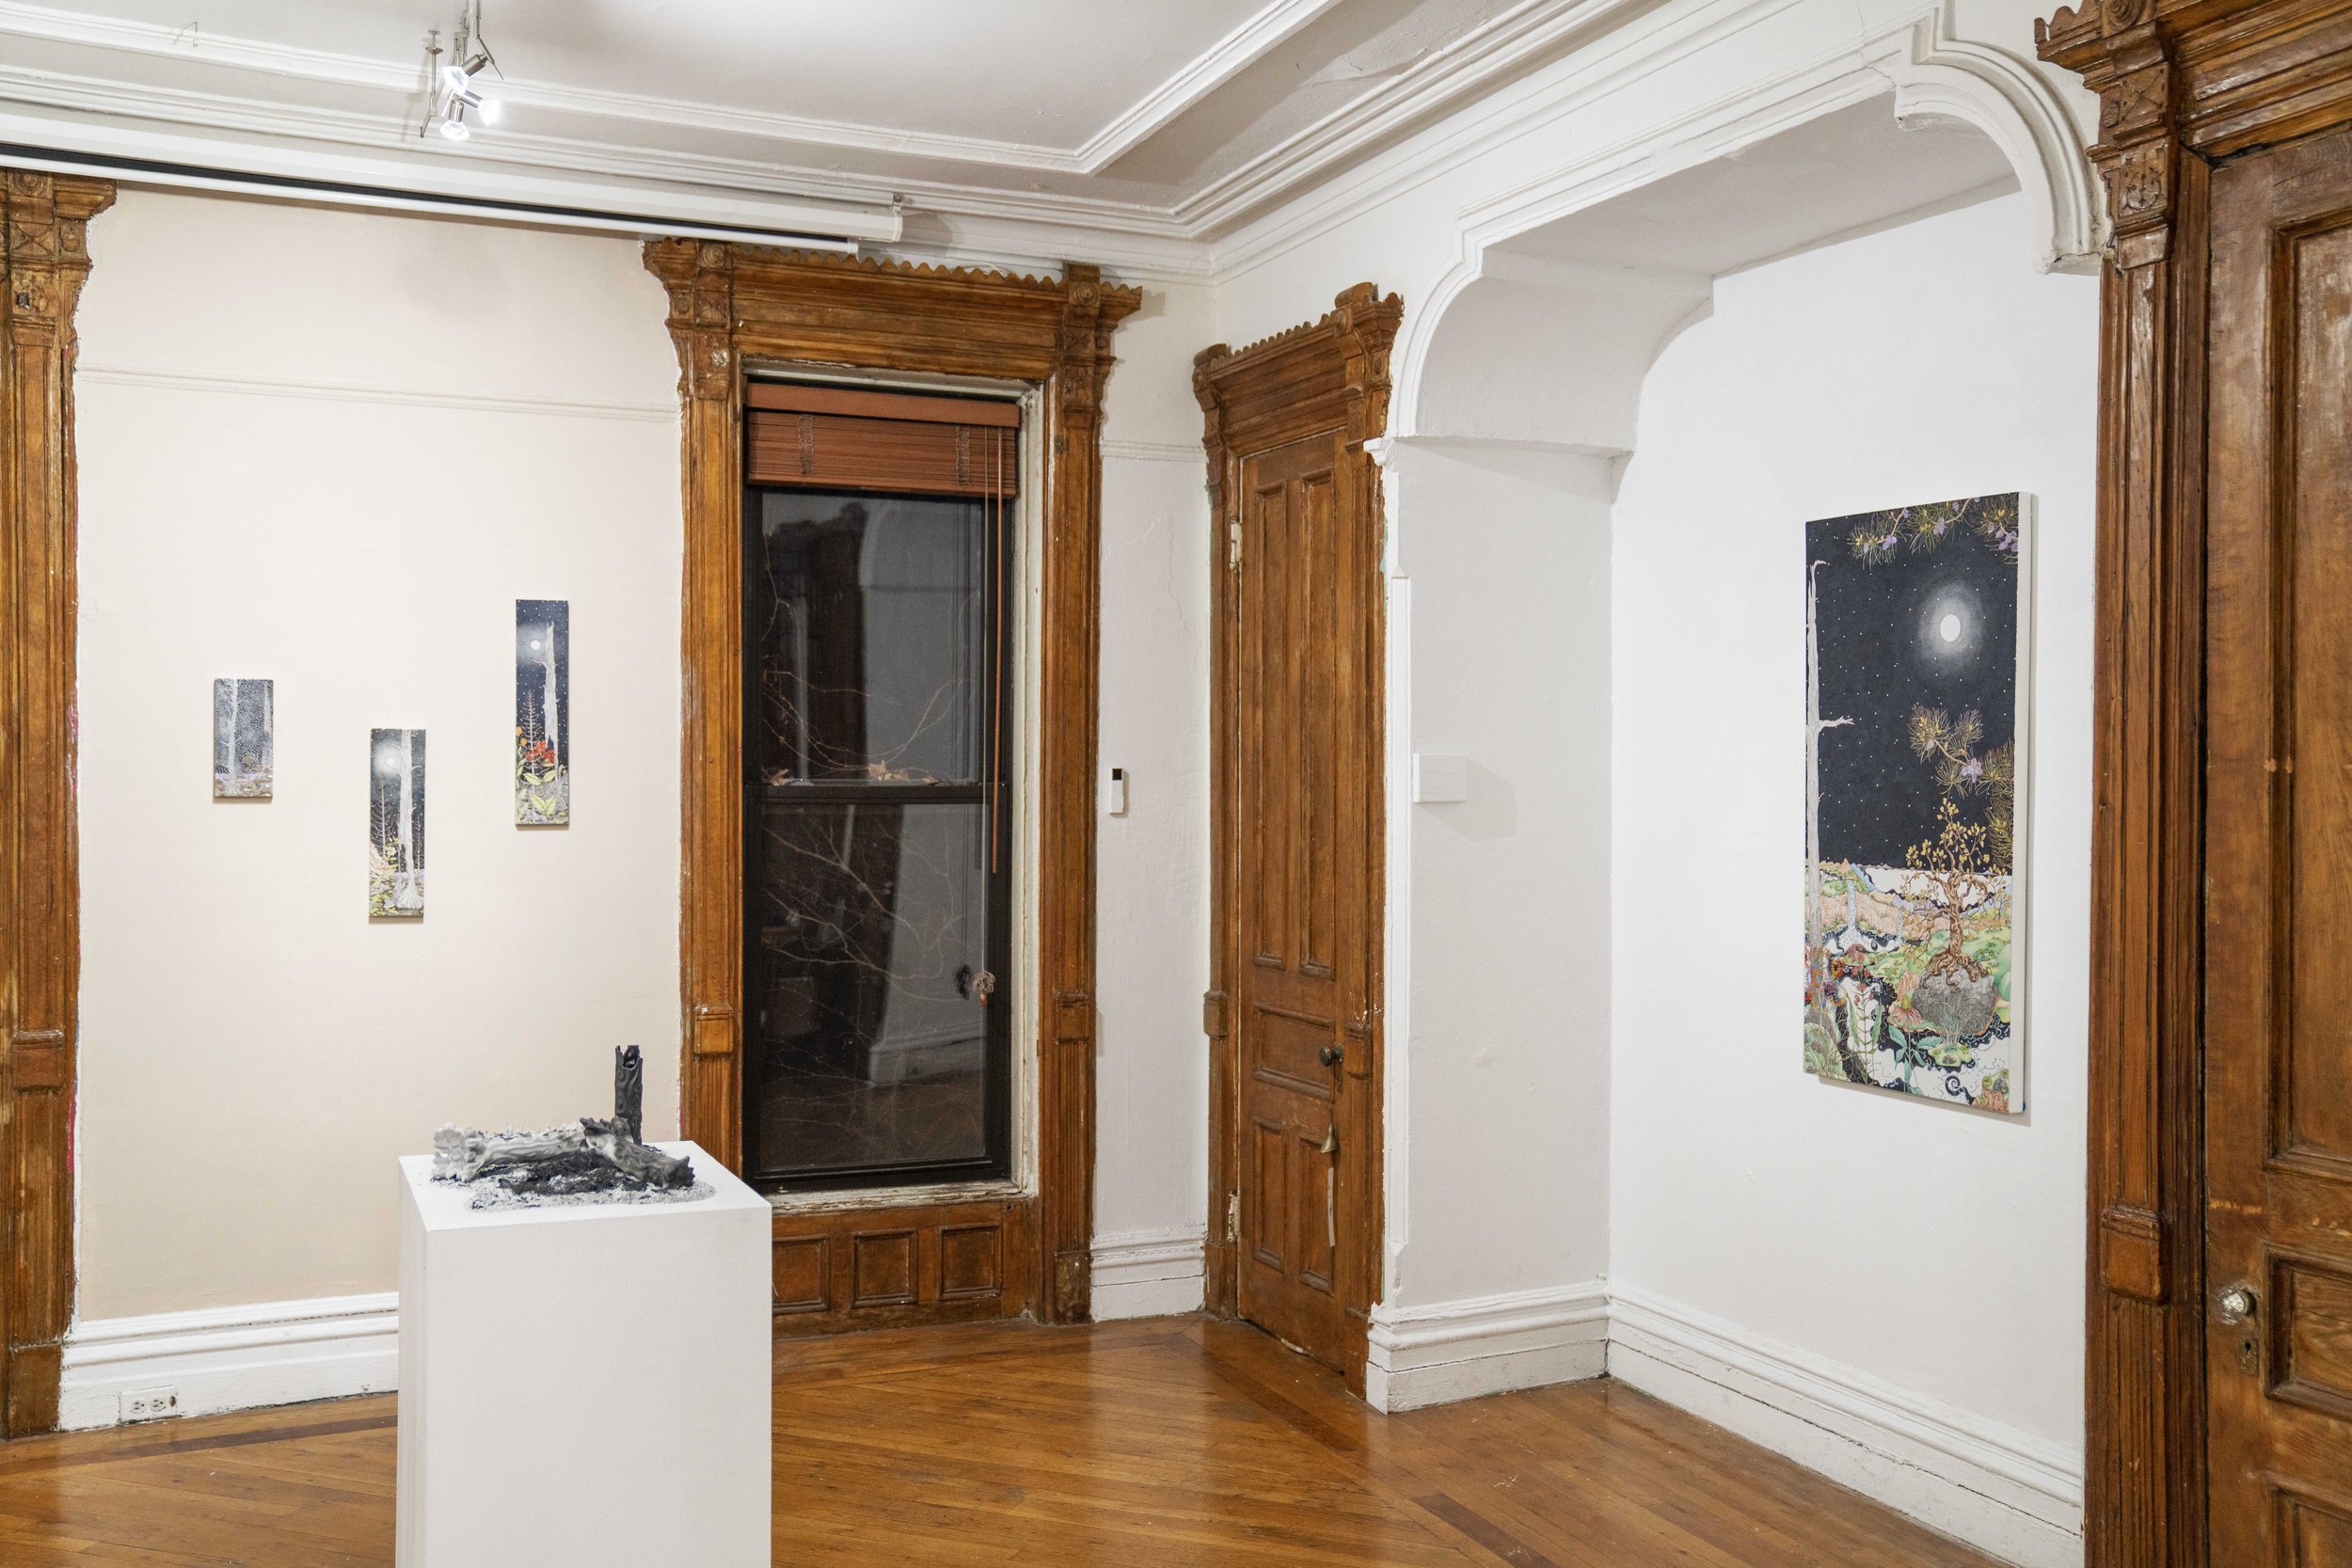  Installation View of Michael Eade: After the Burn. Photo by Joey ZhaoyinWang and Lynn Hai, courtesy of Fou Gallery 